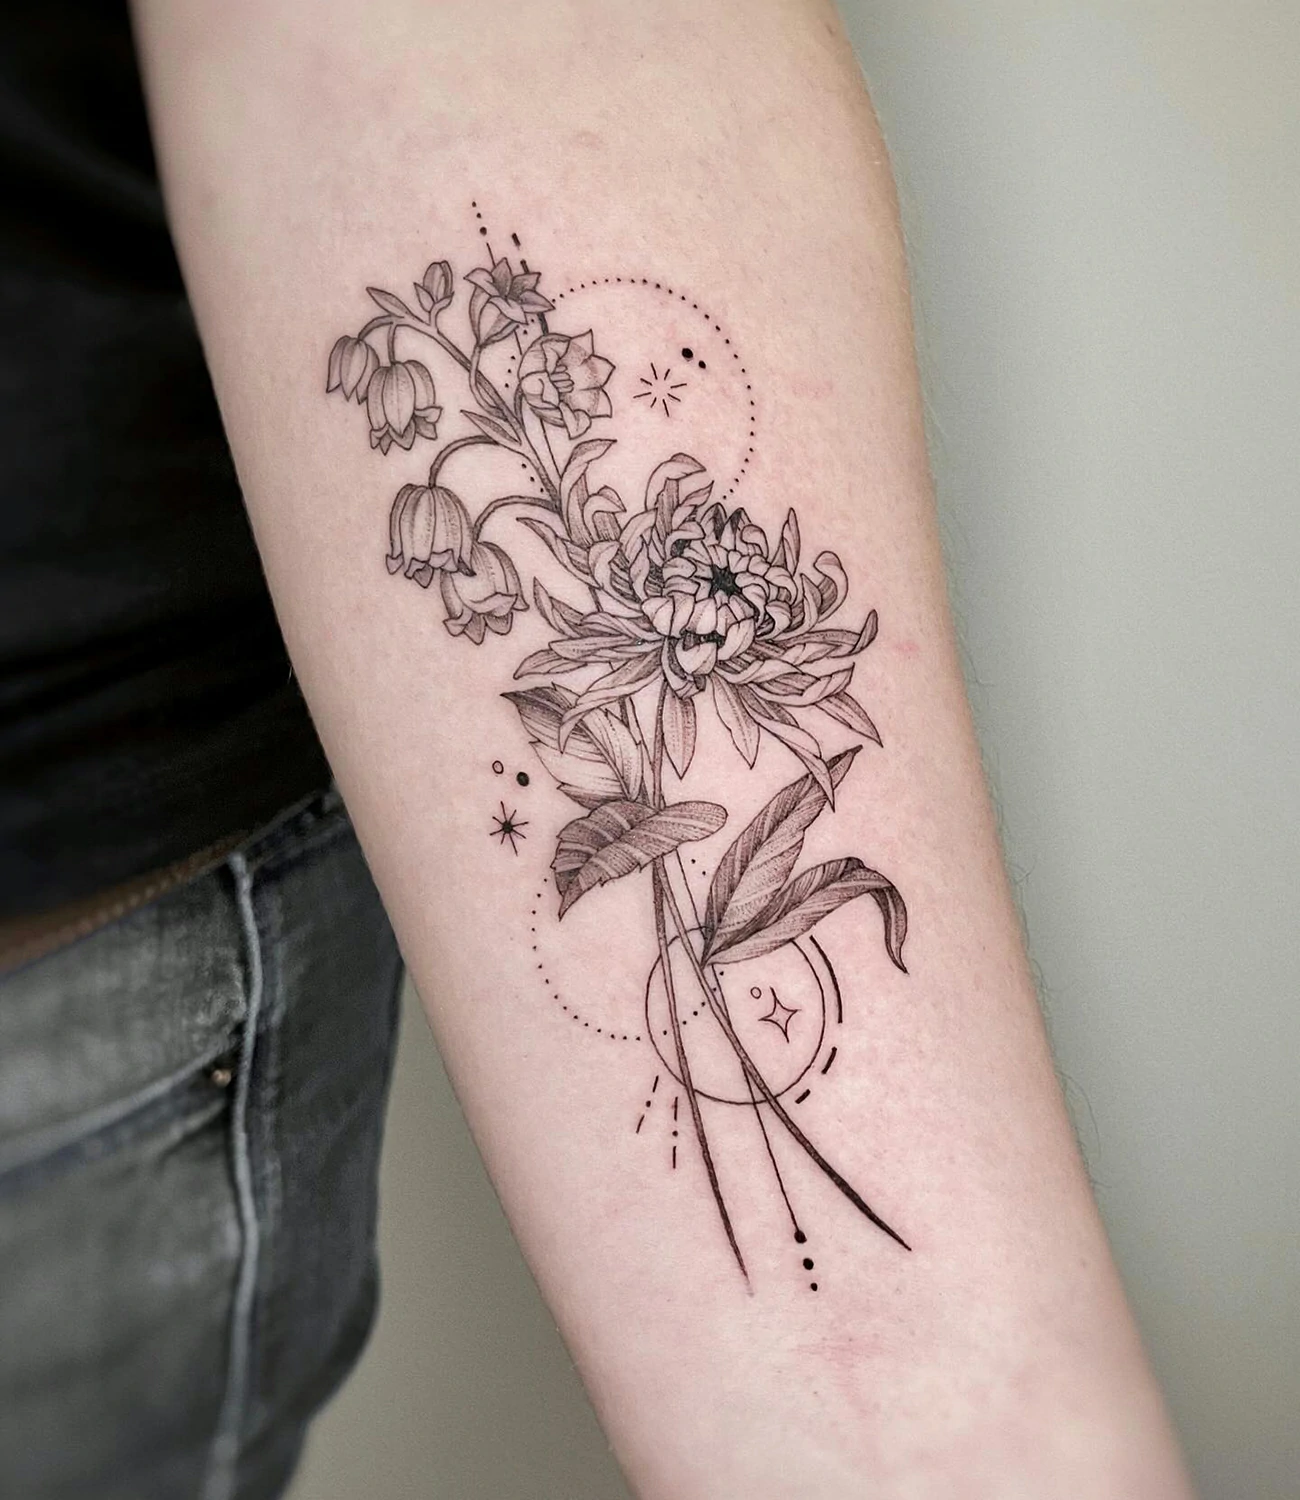 Chrysanthemum and Lily of the Valley Tattoo #chrysanthemumtattoo